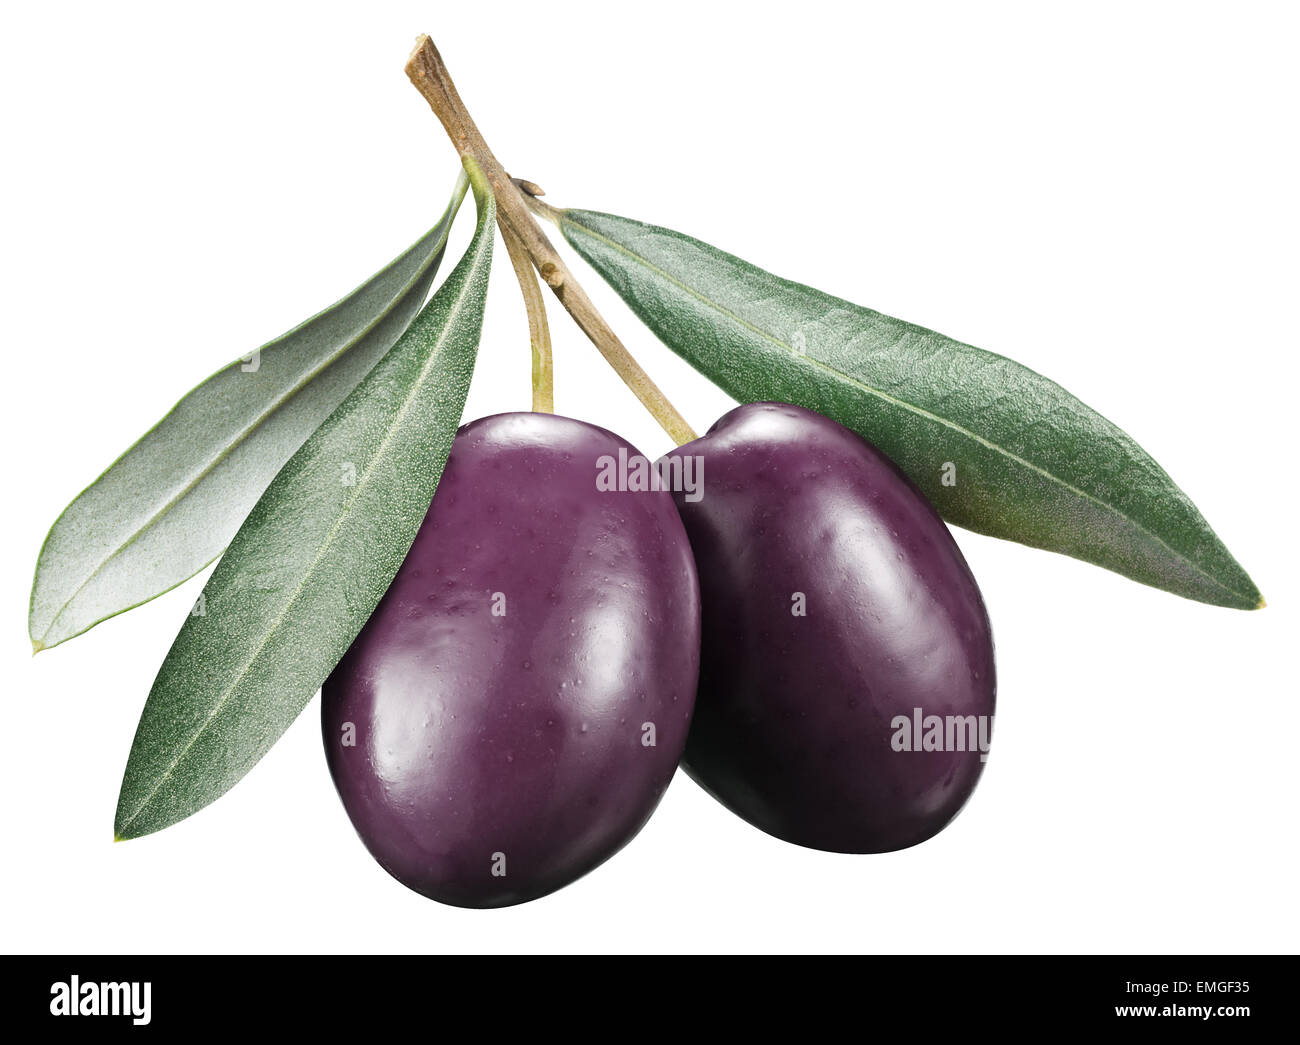 Kalamata olives with leaves on a white background. File contains clipping paths. Stock Photo